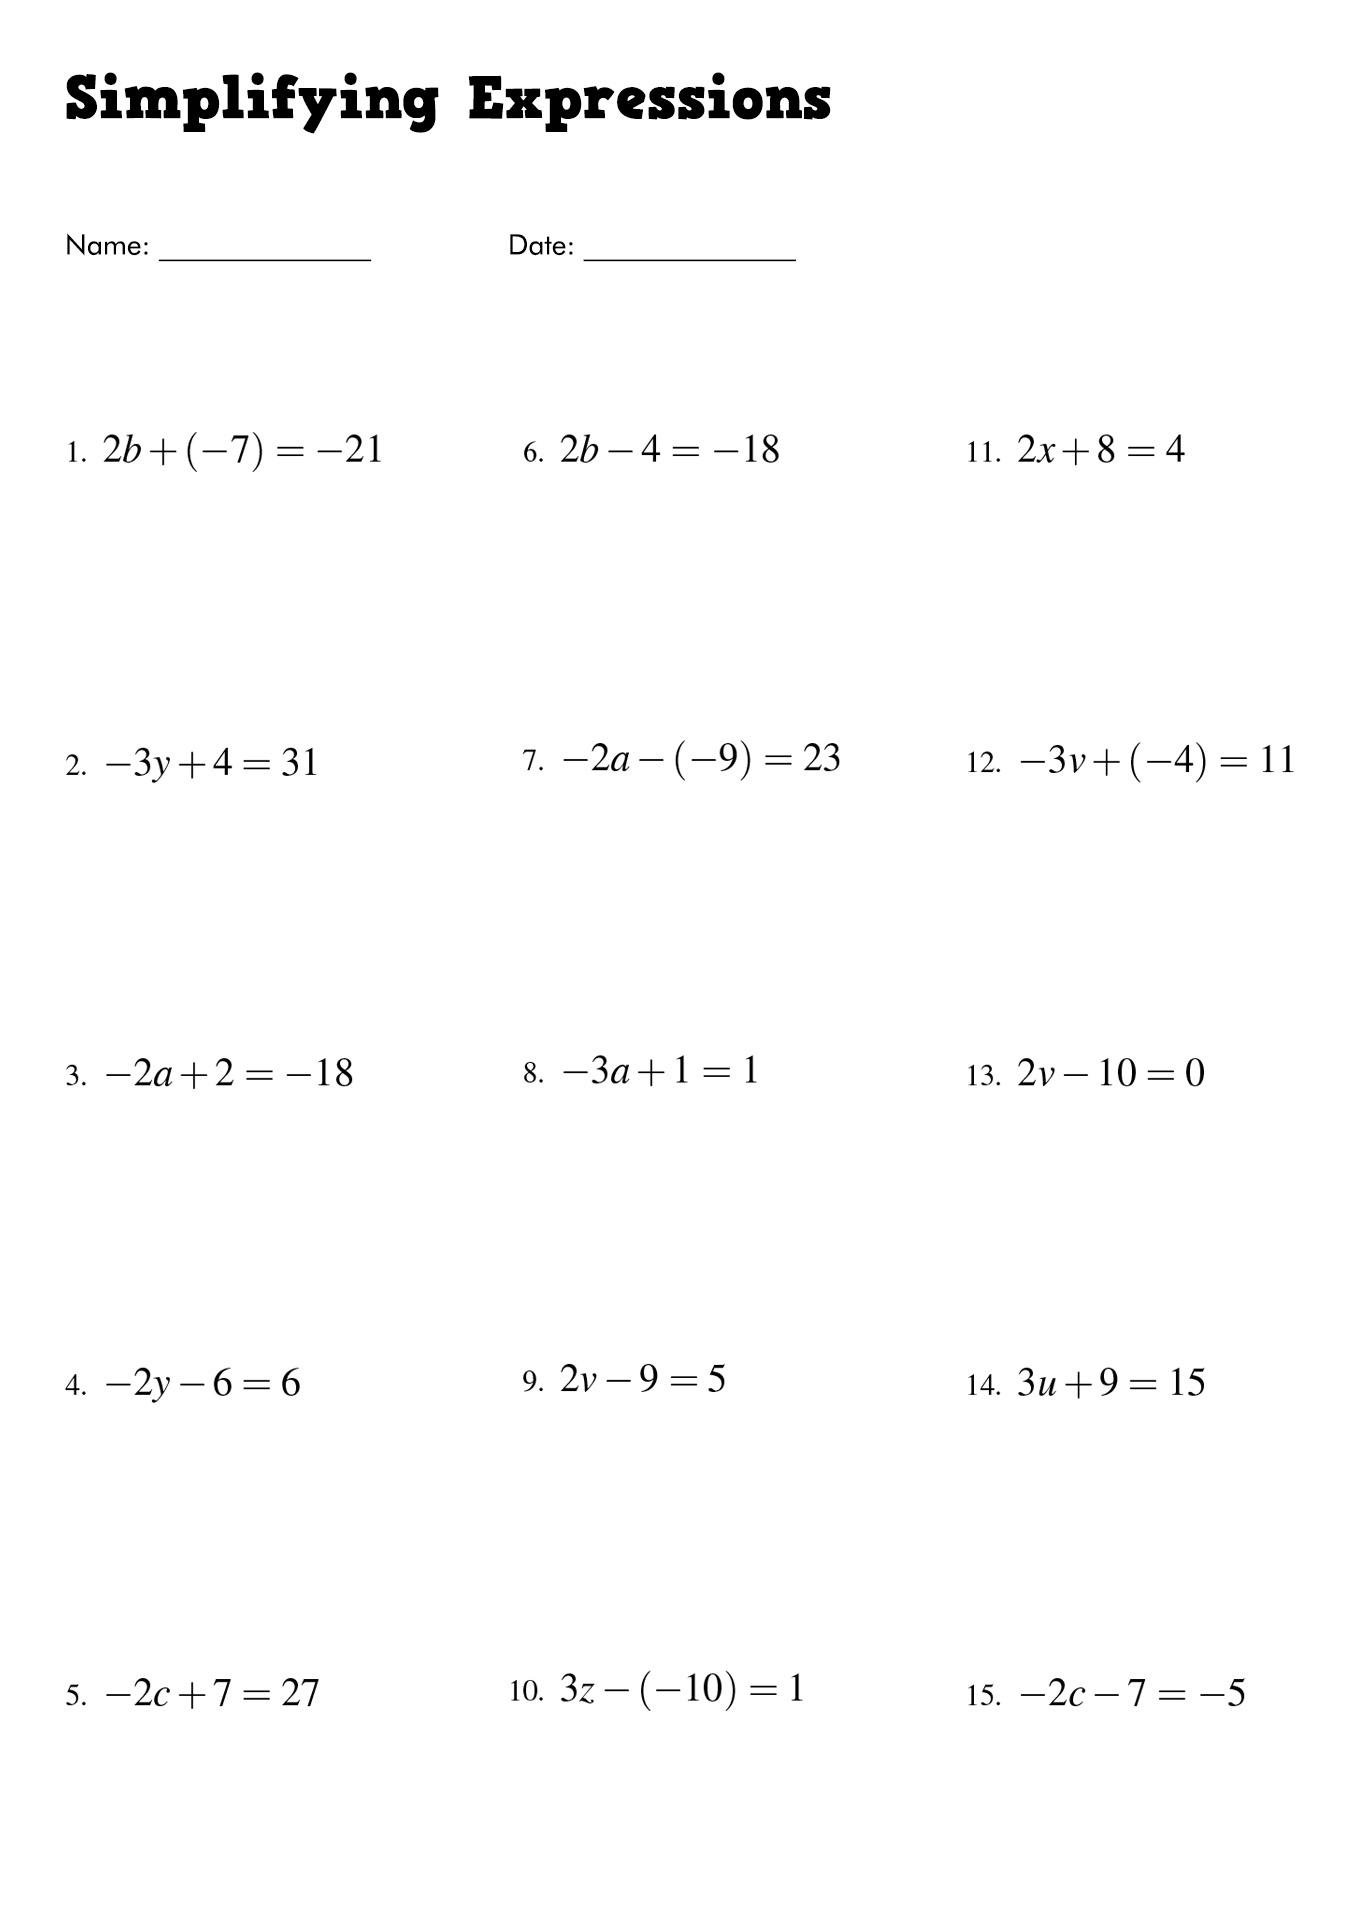 Simplifying Expressions with Variables Worksheets Image